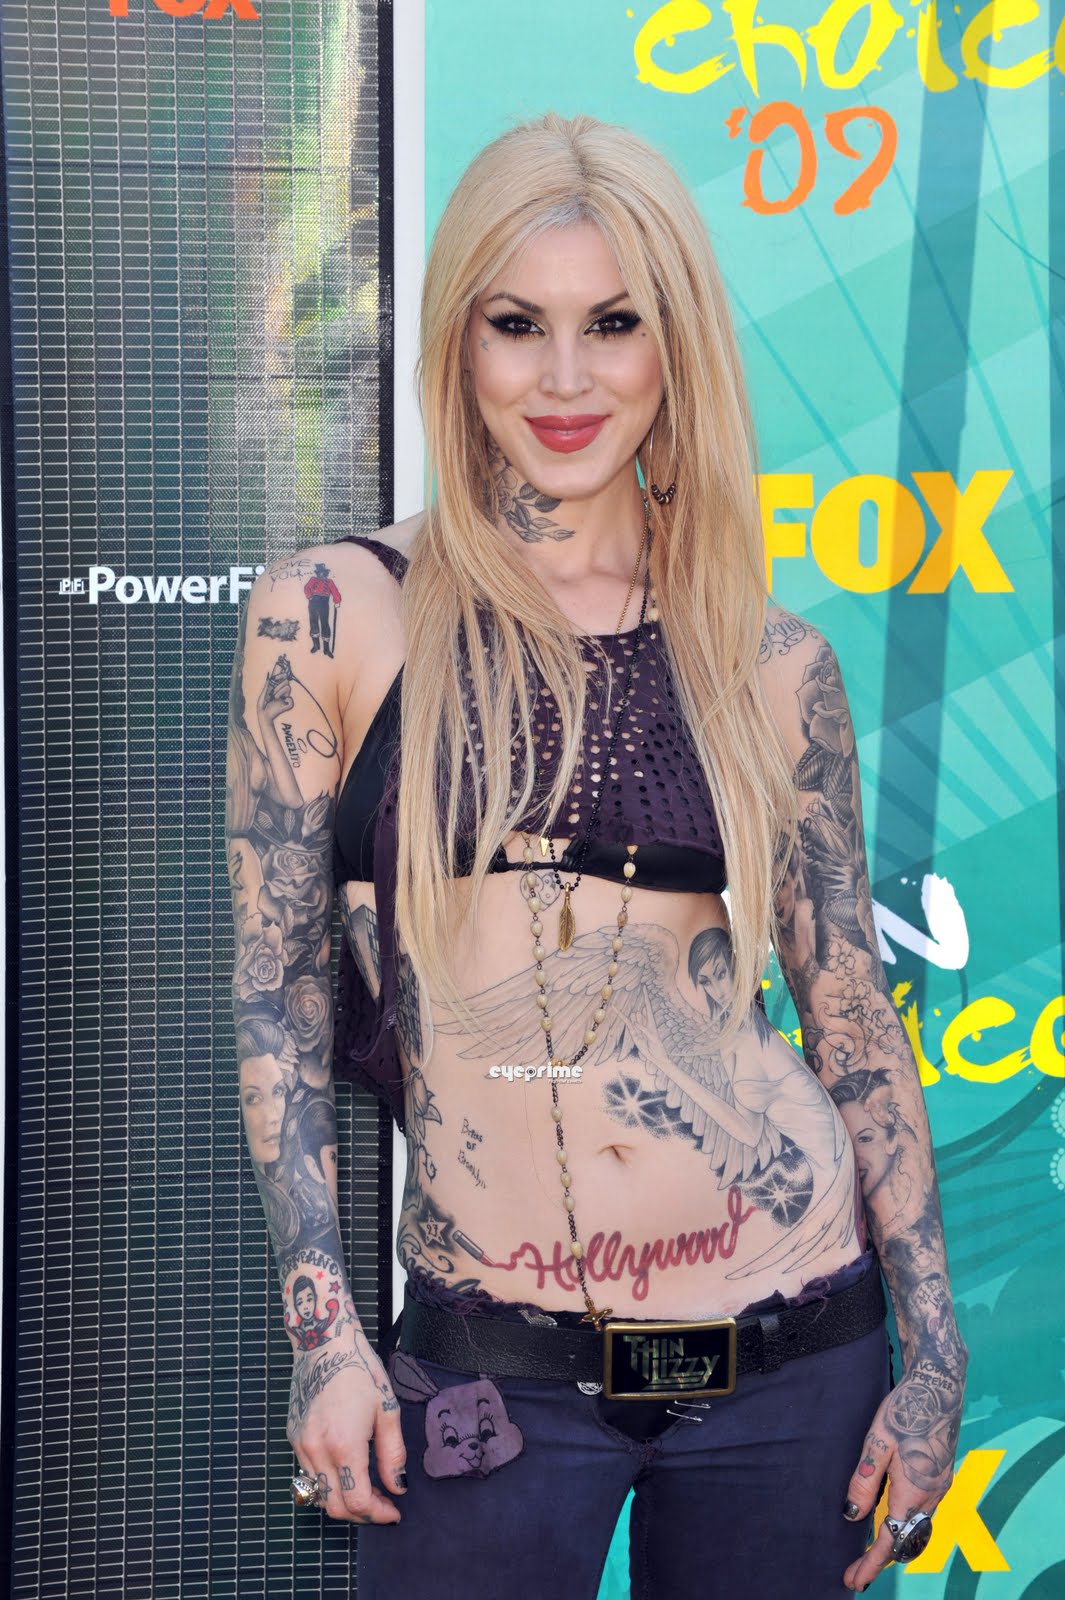 Kat Von D is Most Famous and Best Tattoo Artist.